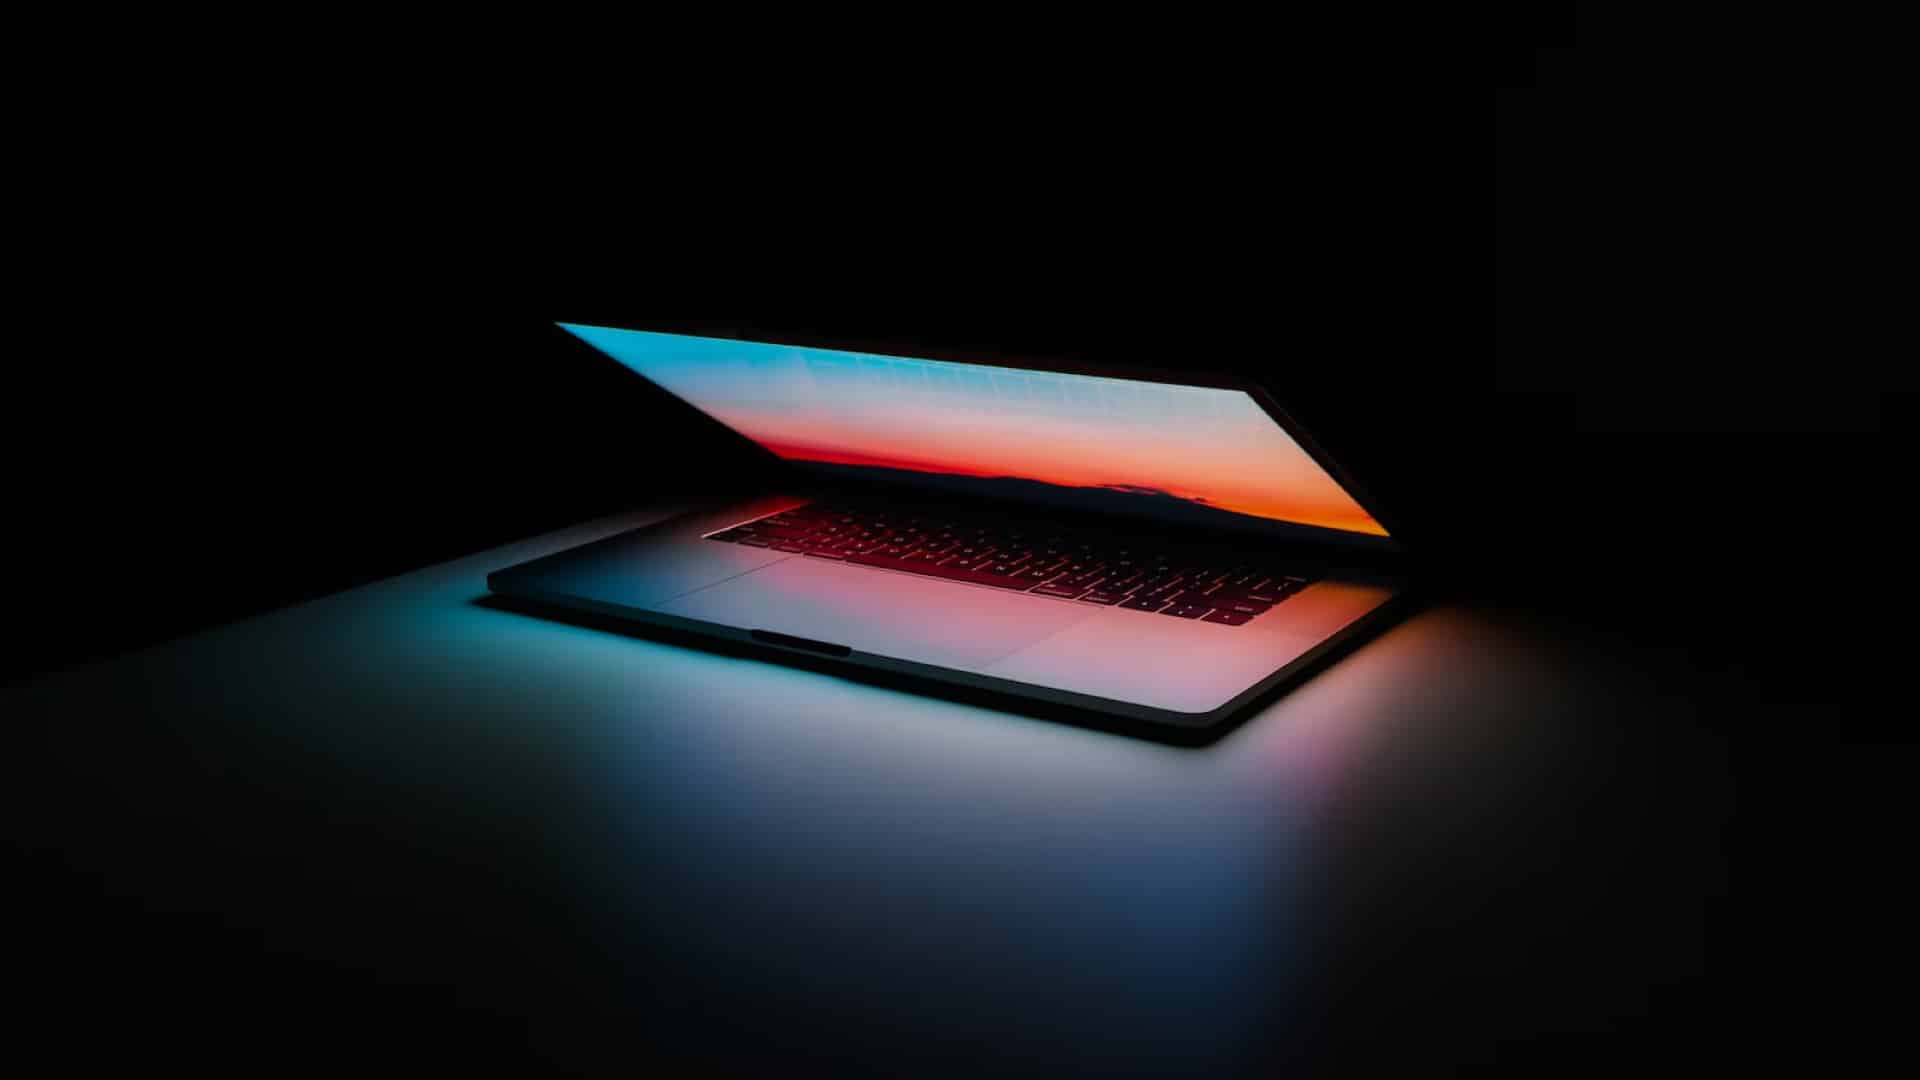 Apple macbook pro slightly open with rainbow screensaver and black background